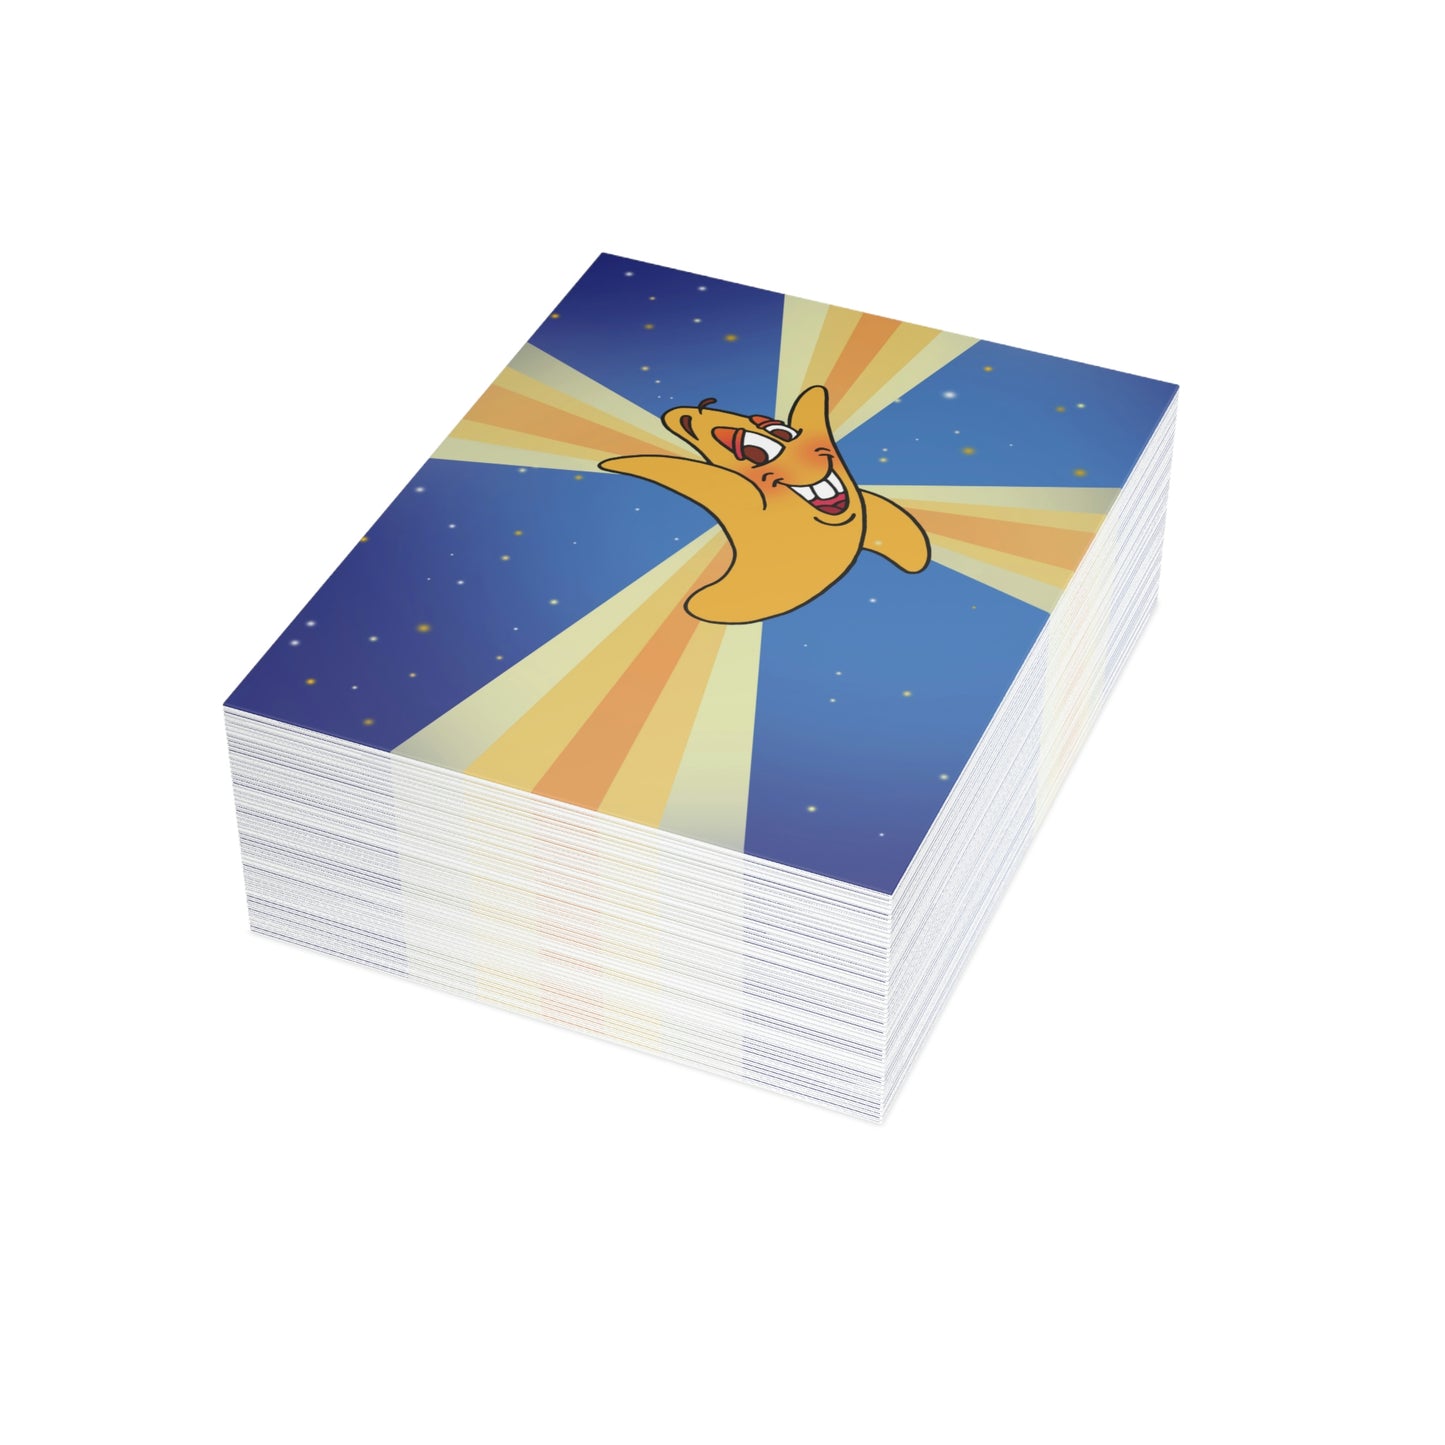 Pick Me Cried Arilla! Greeting Card Bundles (envelopes not included)